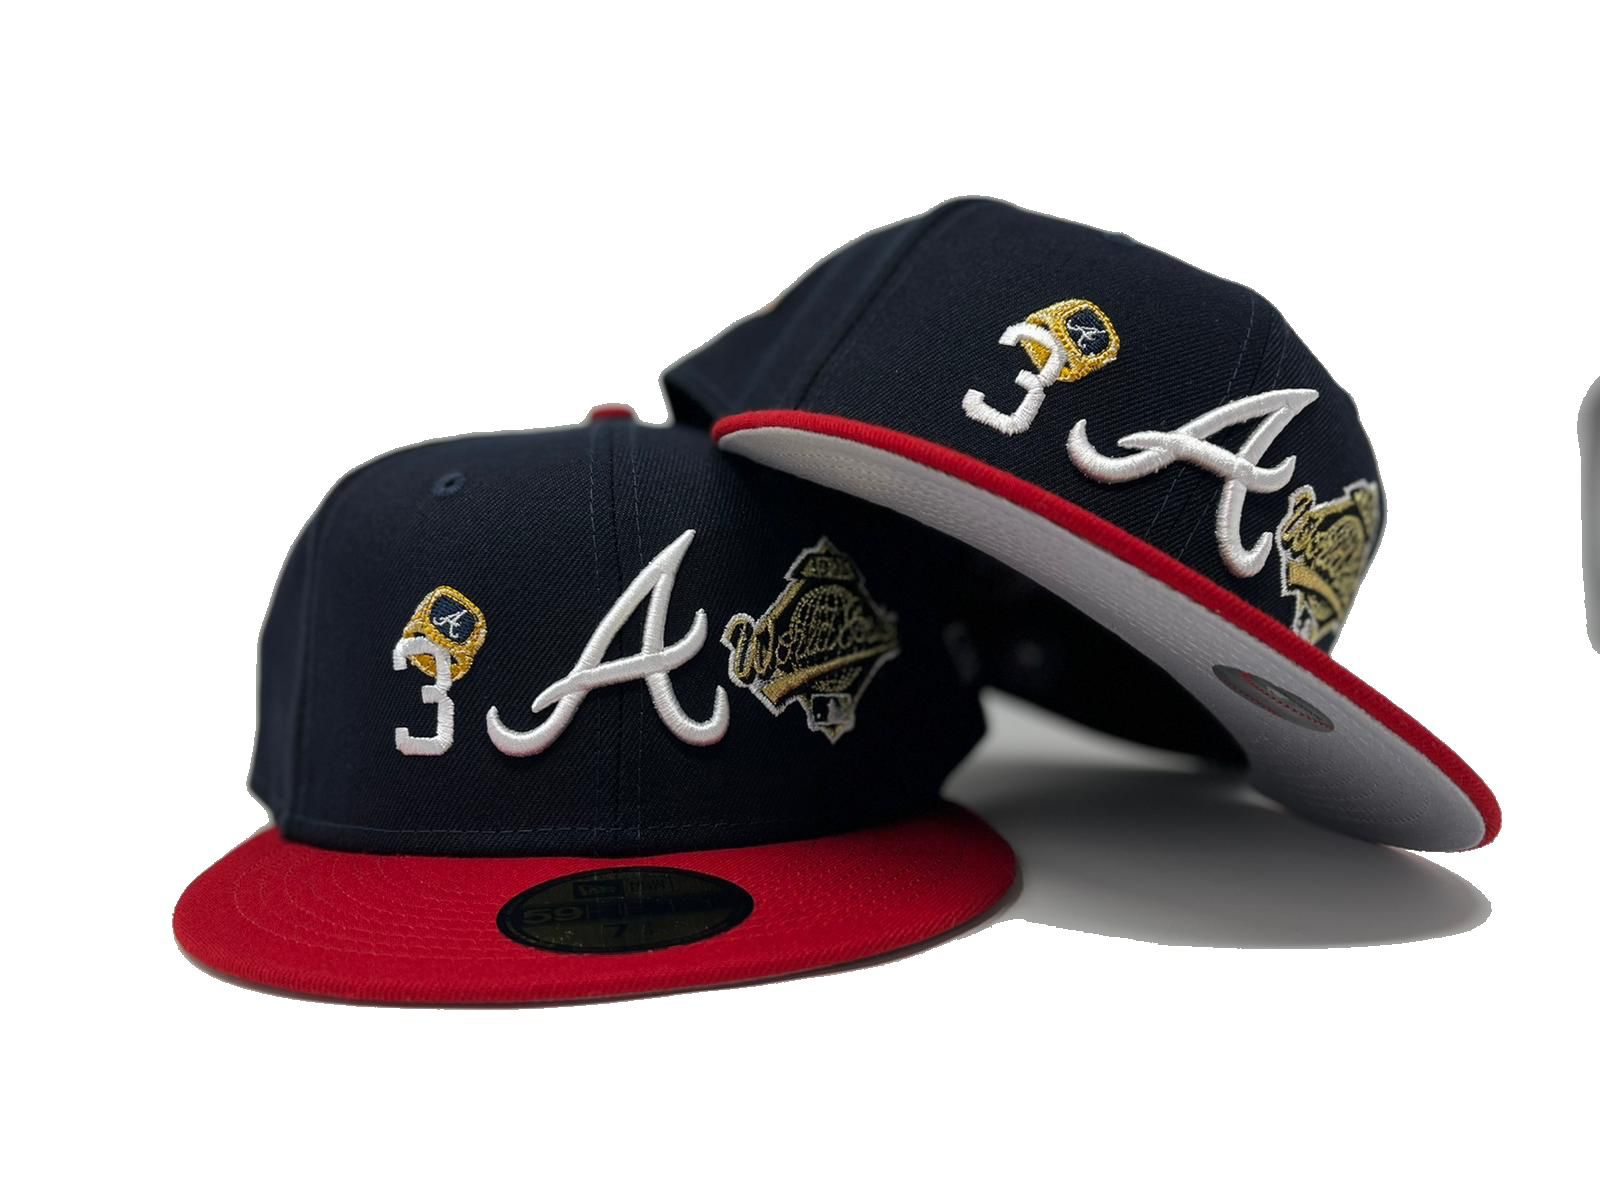 Two Atlanta Braves 2021 Championship Hats in Excellent Condition